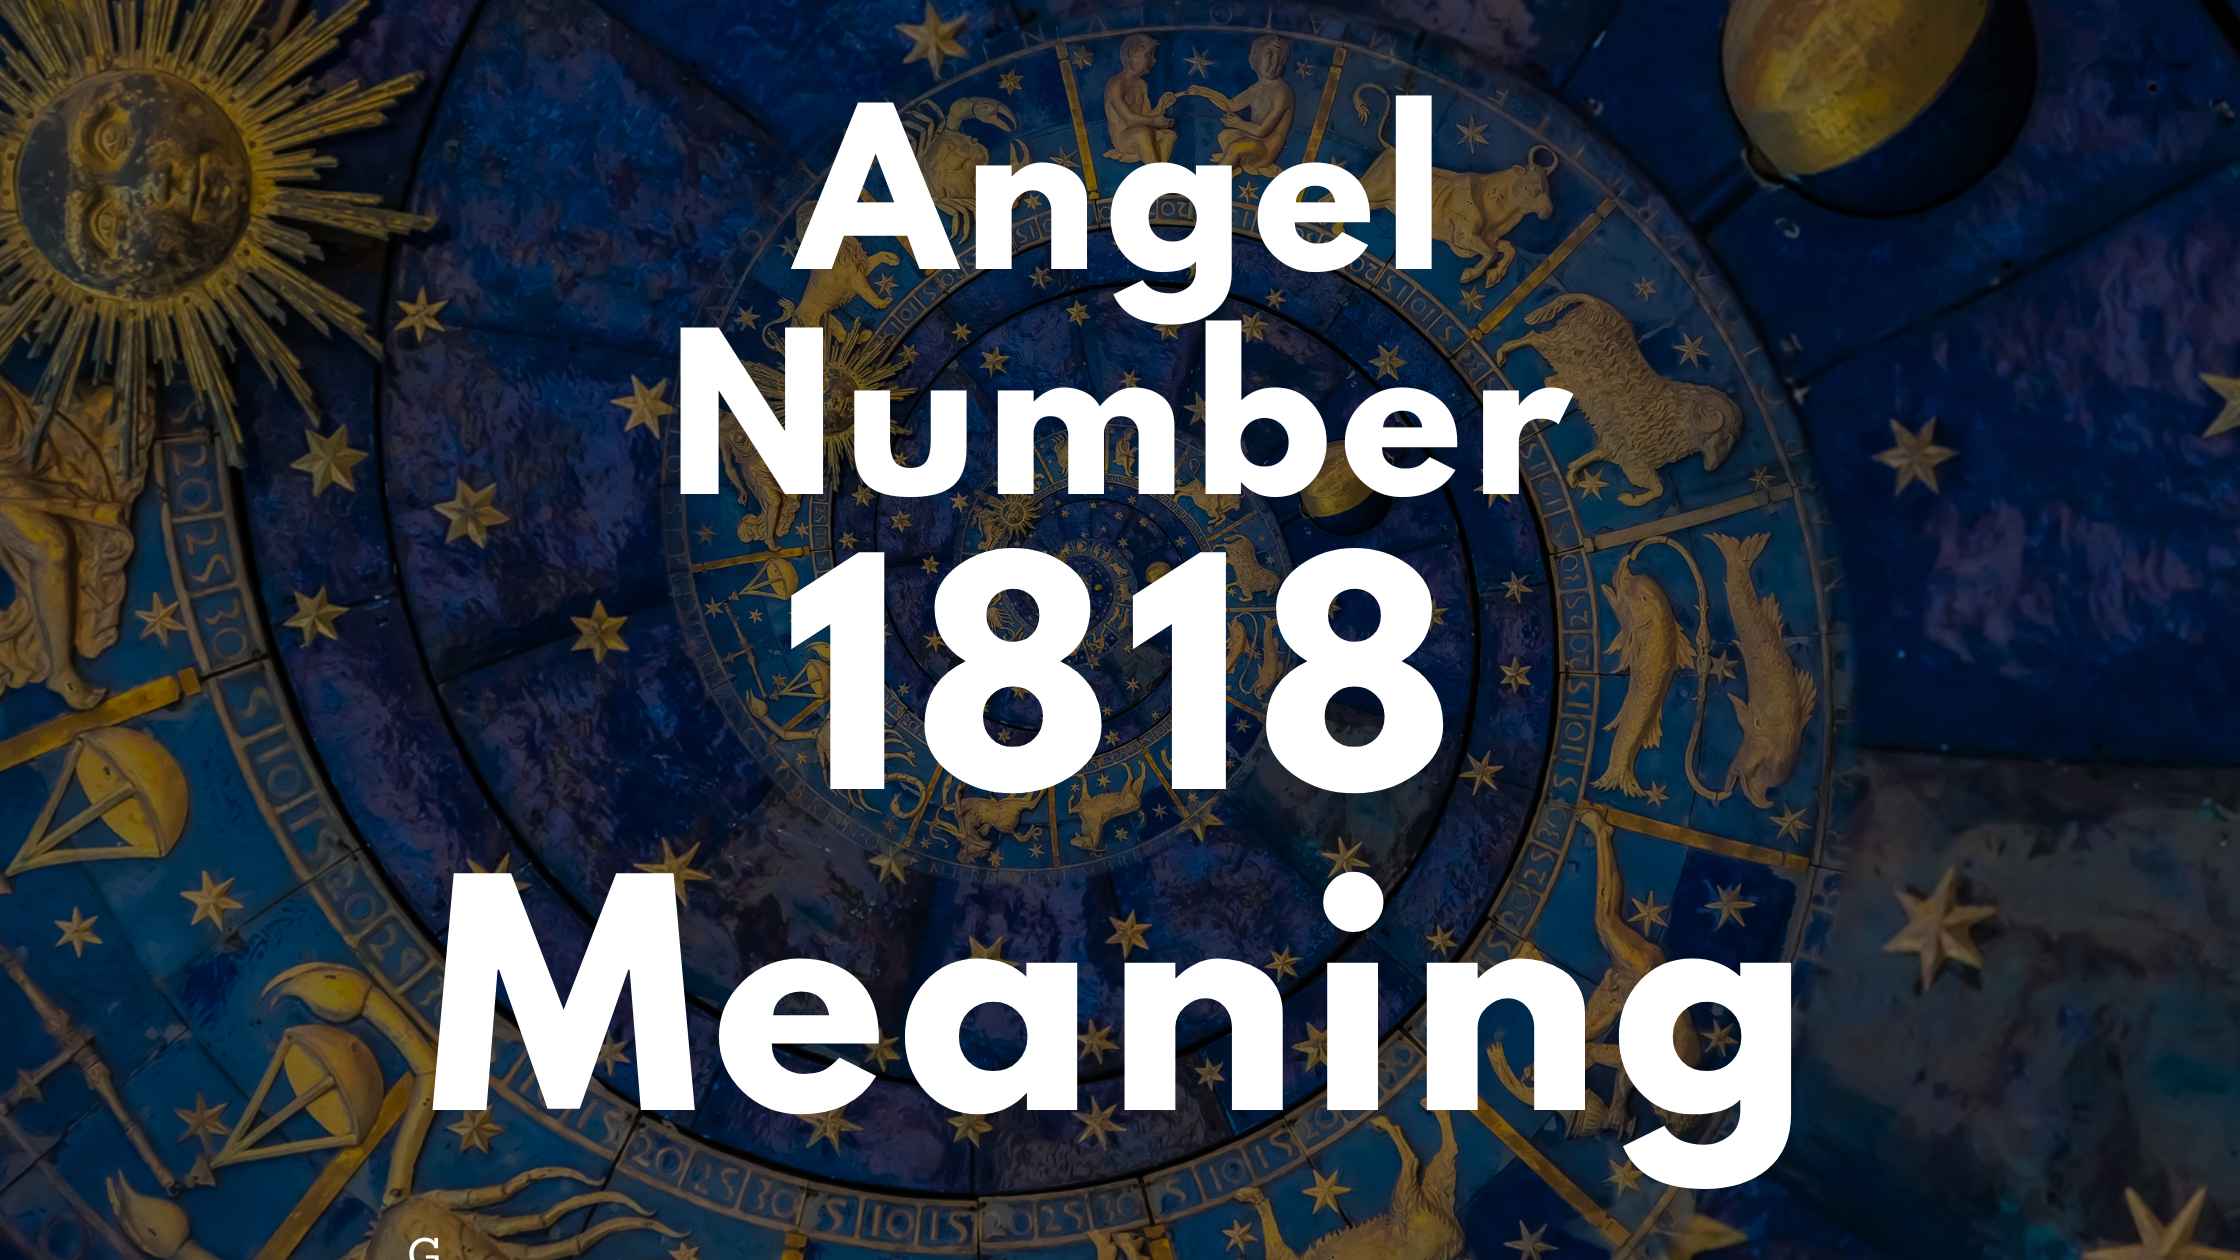 Angel Number 1818 Spiritual Meaning, Symbolism, and Significance